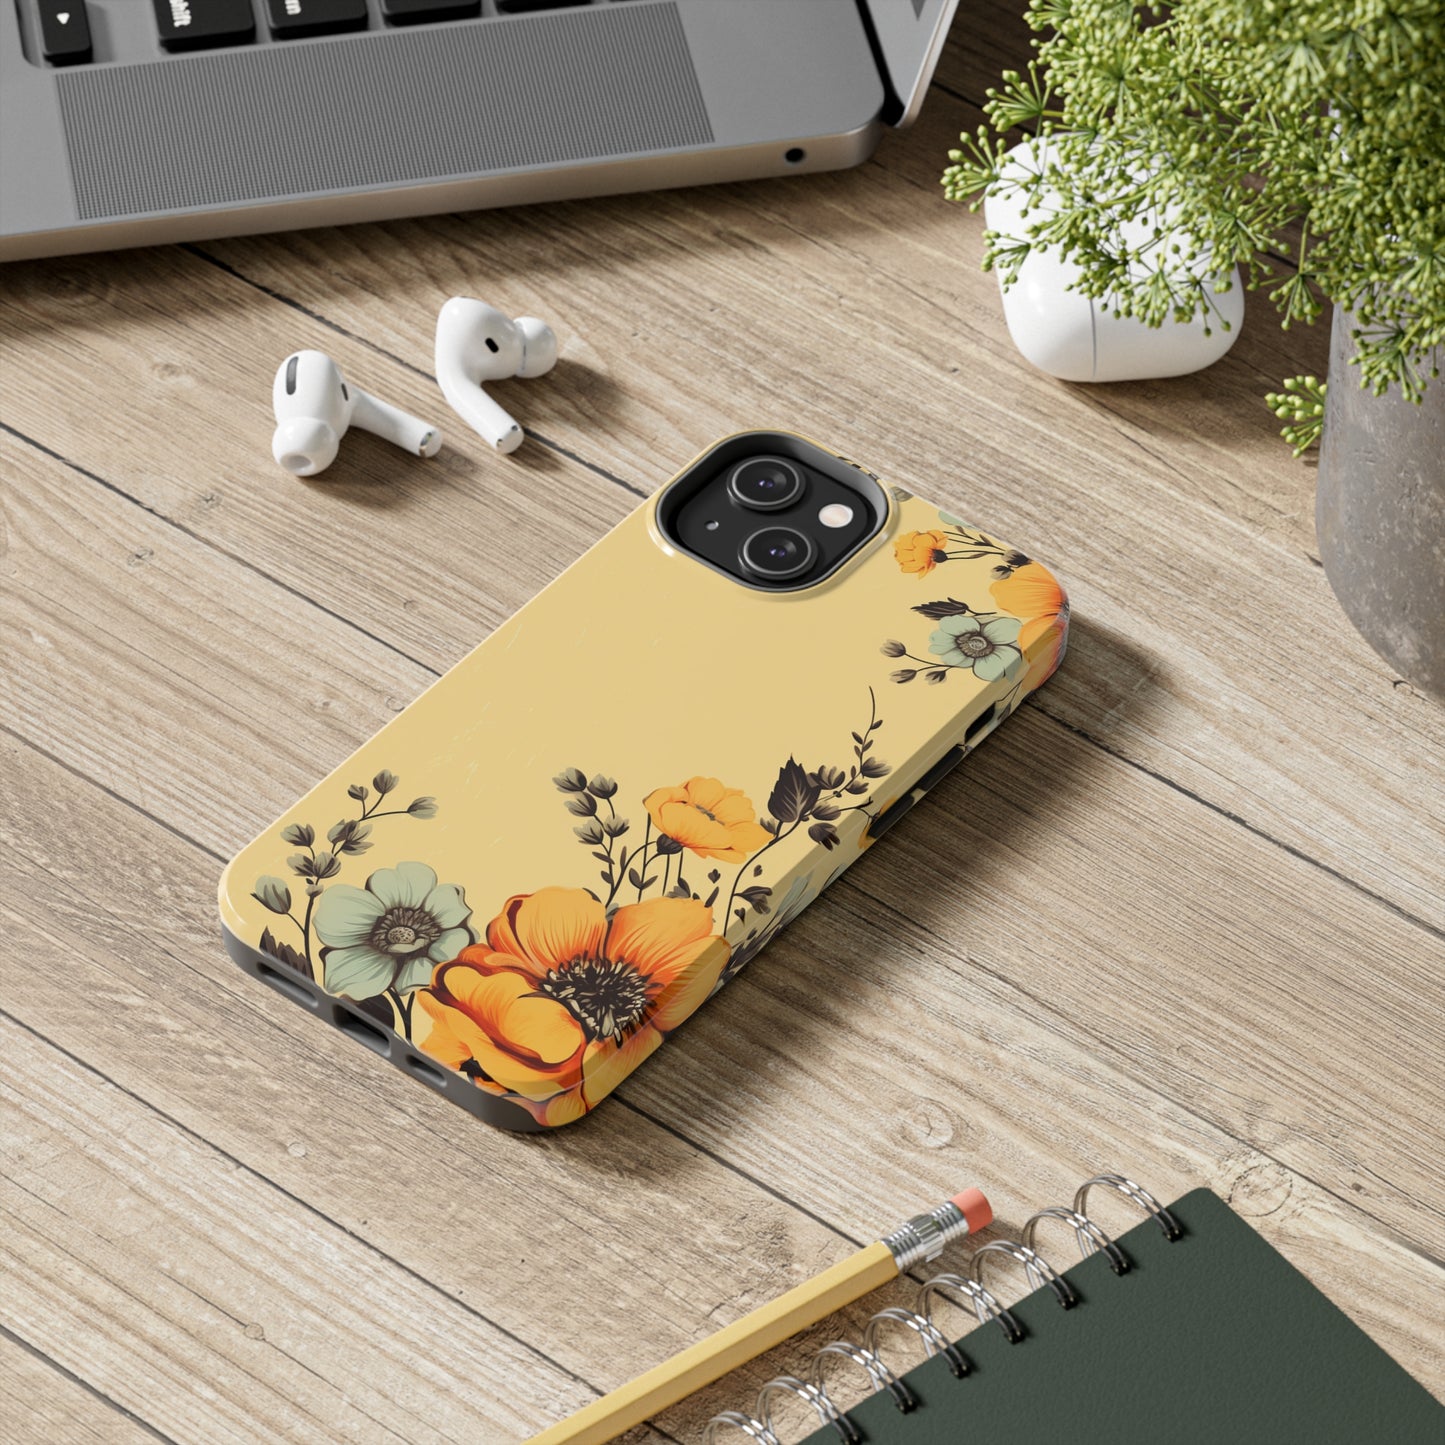 Glossy iPhone case with vintage floral motifs